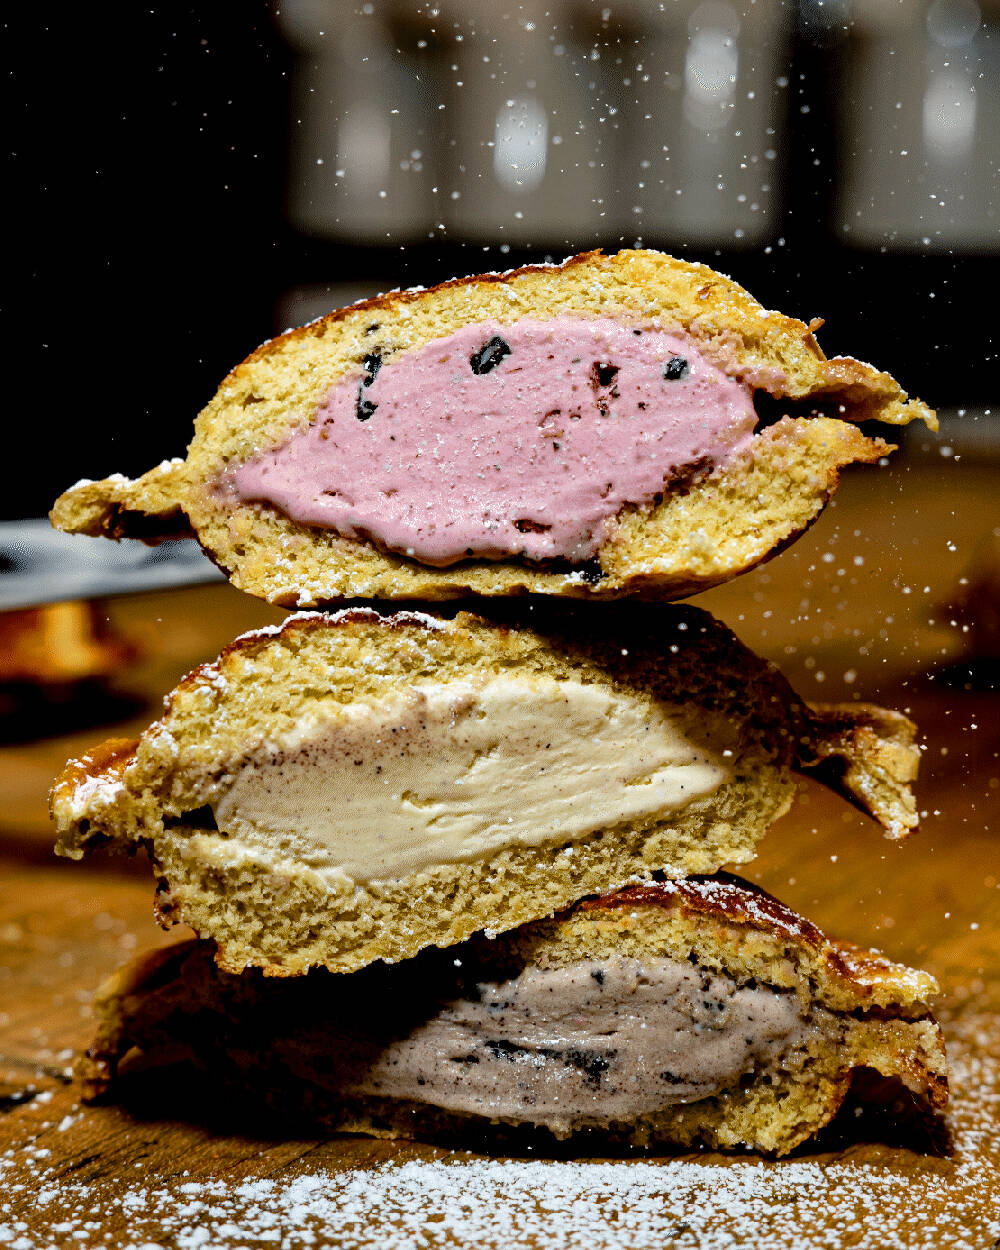 Three dolce caldo cut in half and stacked on top of one another; one with berry ice cream in the center, one with a caramel colored ice cream, and one with a chocolate ice cream.